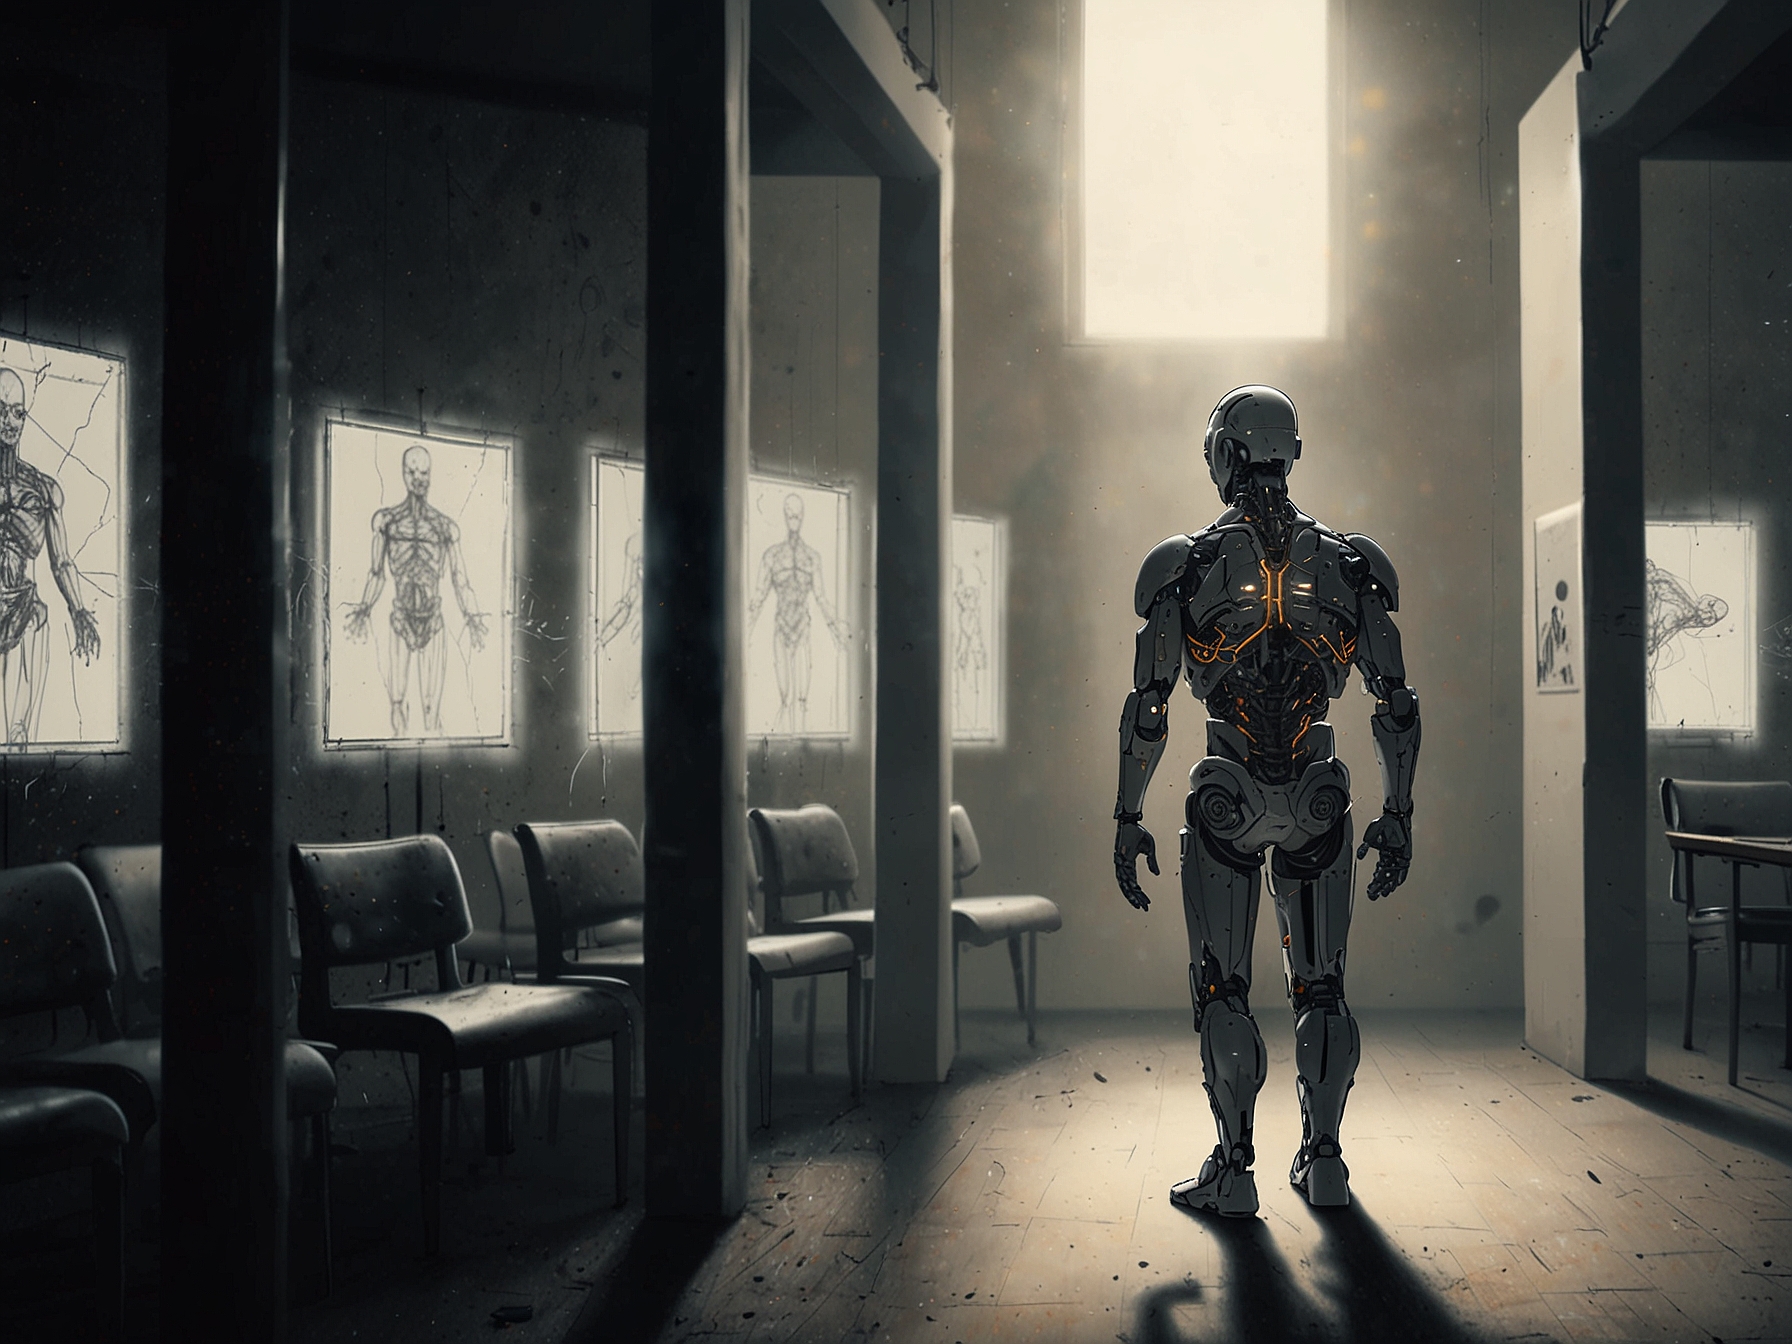 A conceptual illustration showing humans fading away while an AI representation takes over, highlighting the controversial idea that AI might replace humanity suggested by Hinton.